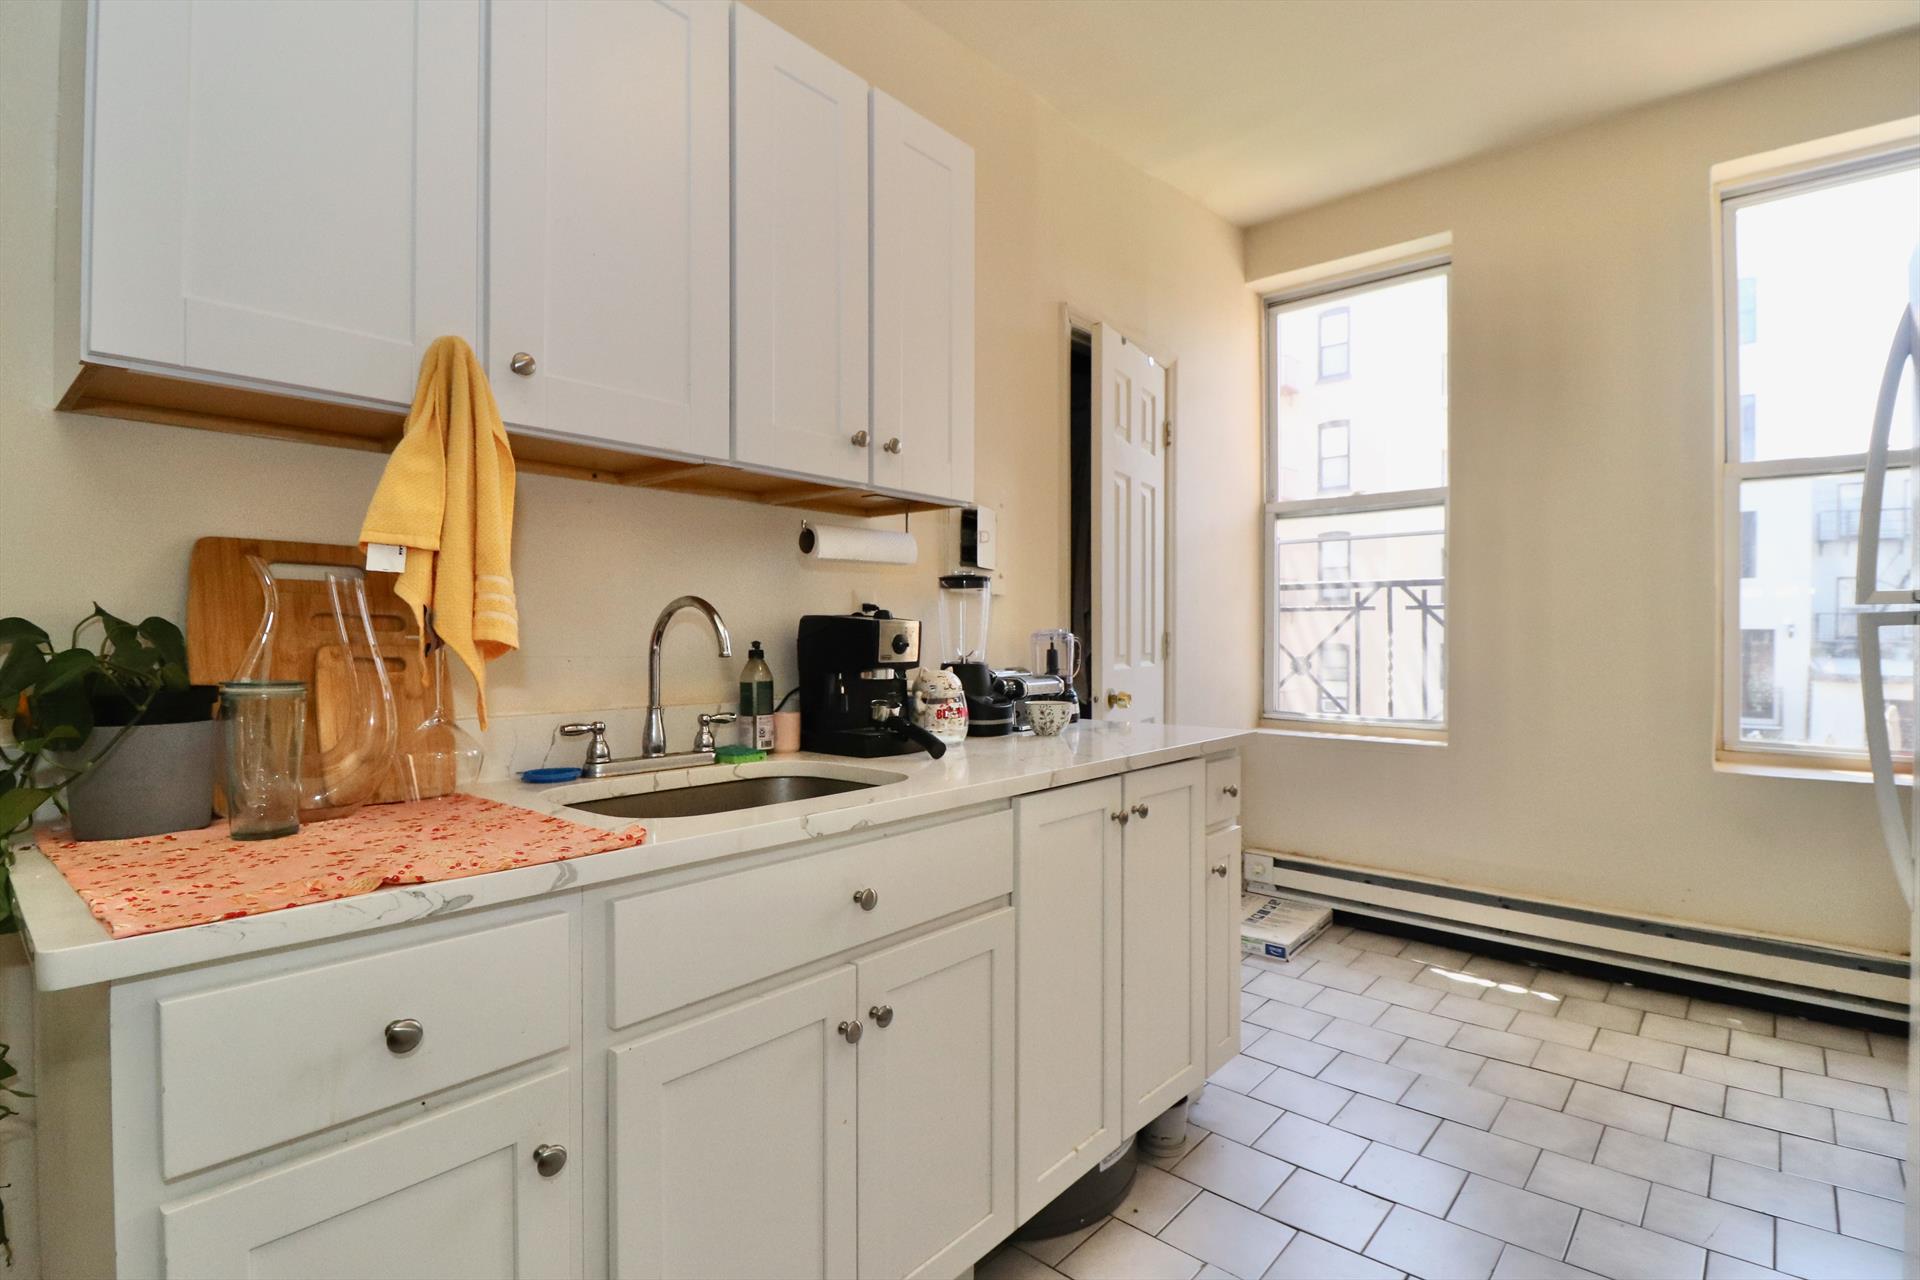 This apartment features a sun-filled bedroom, spacious shared backyard, and kitchen with shaker style cabinets and quartz countertops. Located in a great Midtown Hoboken location, allowing for easy transportation for commuters who can also enjoy close proximity to great restaurants, shopping, and parks. Available August 1st!